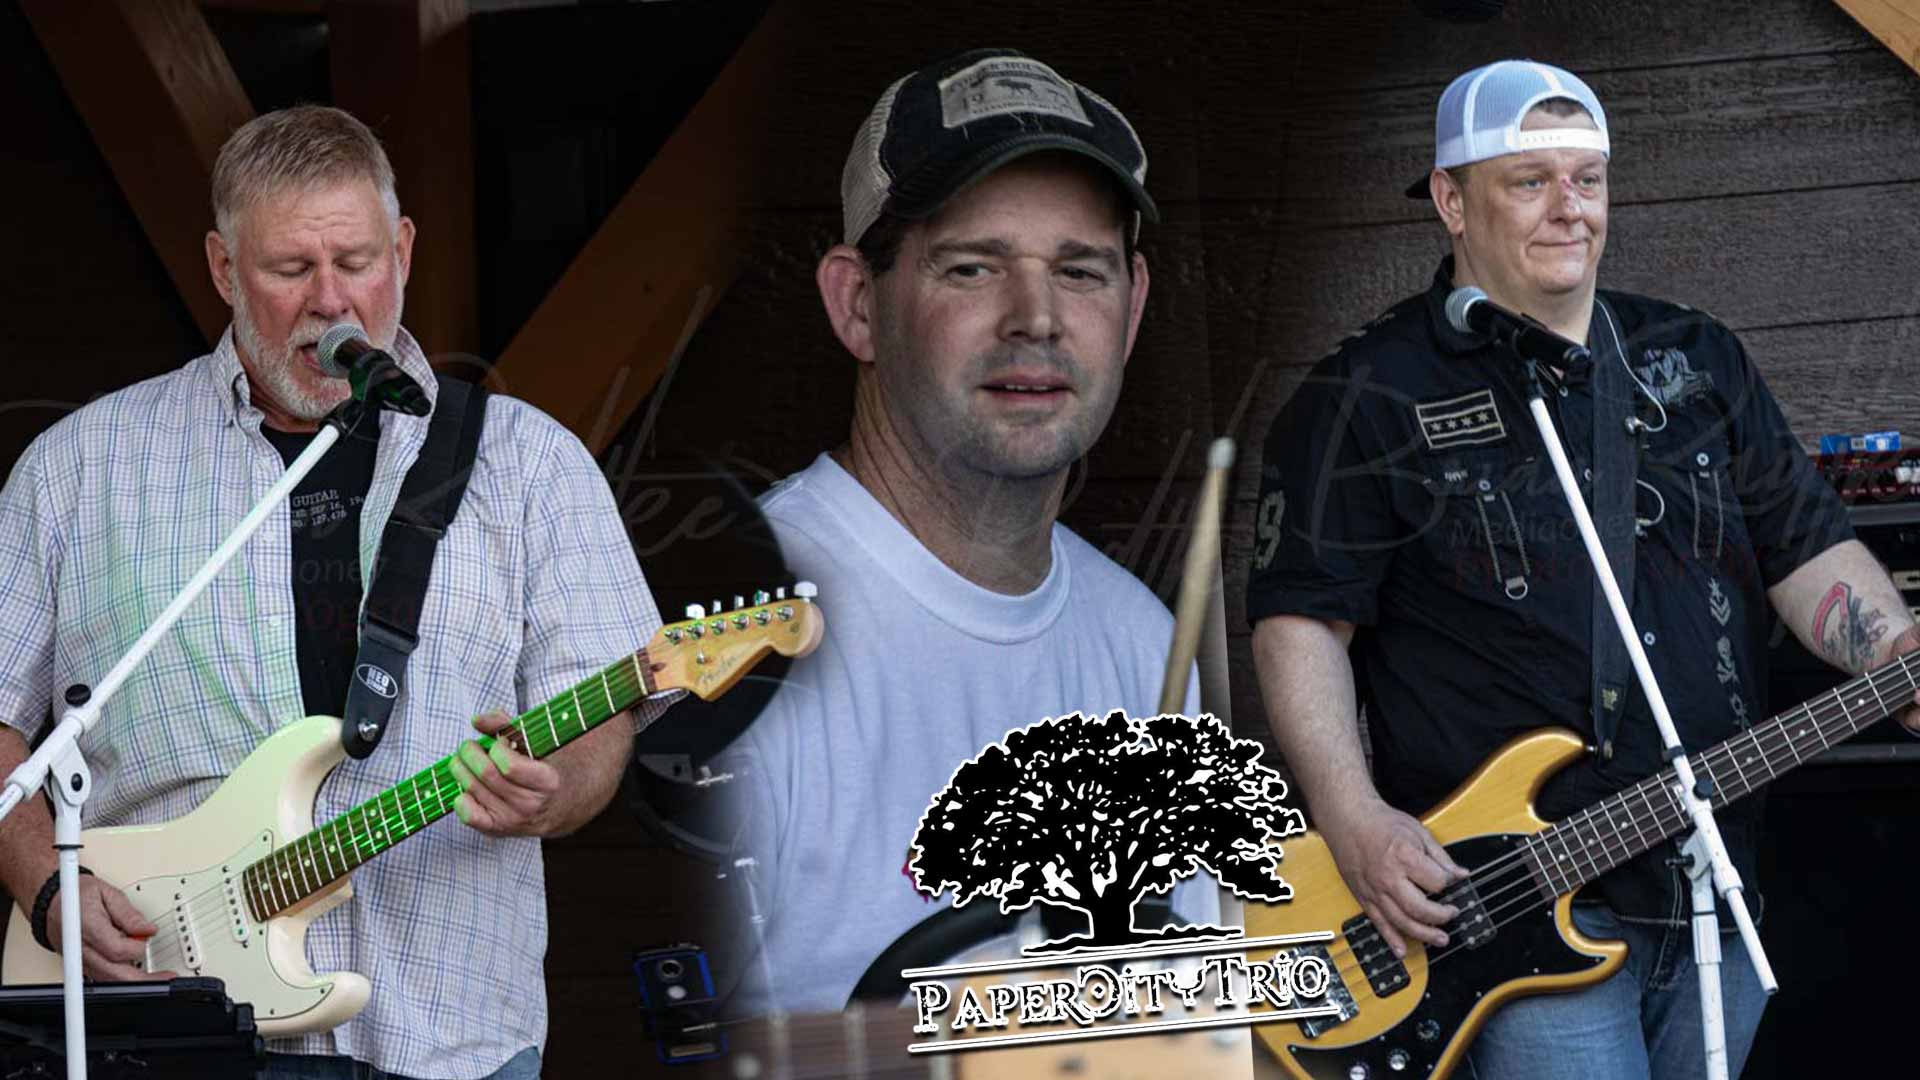 Paper City Trio at Northland Sports Pub and Grill